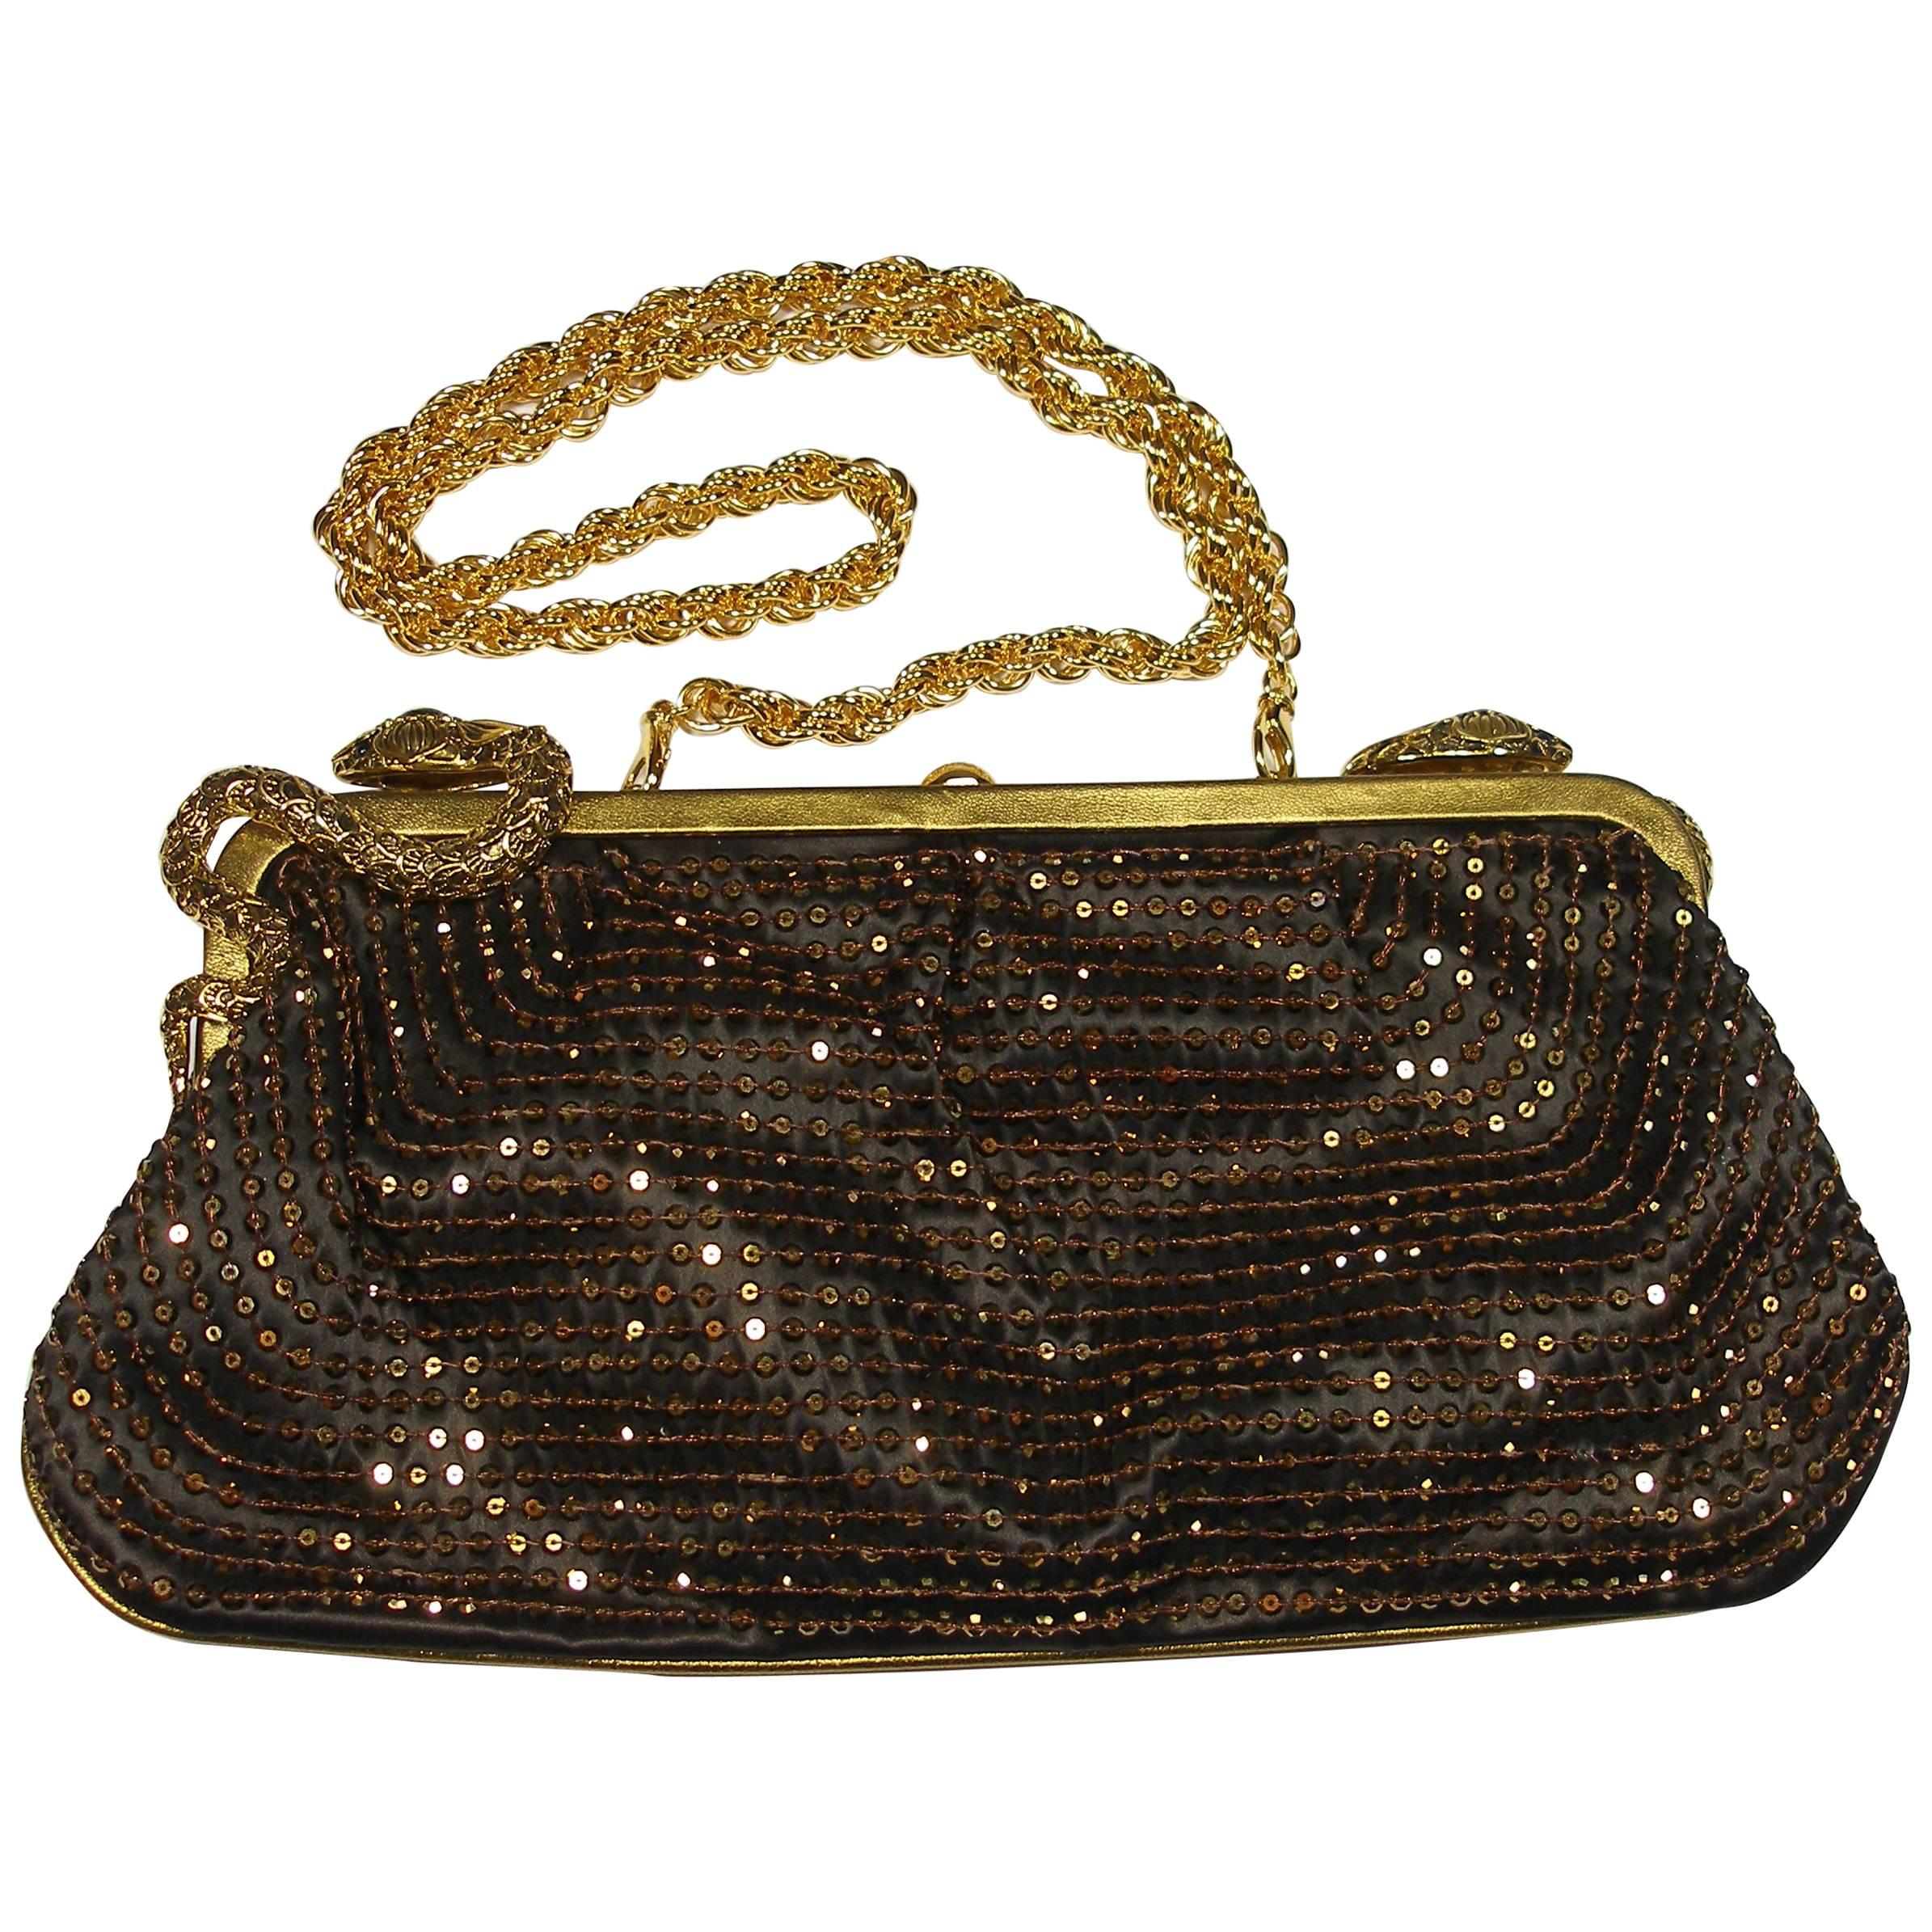 STUNNING Embellished Roberto Cavalli Clutch Evening bag / Limited Edition For Sale